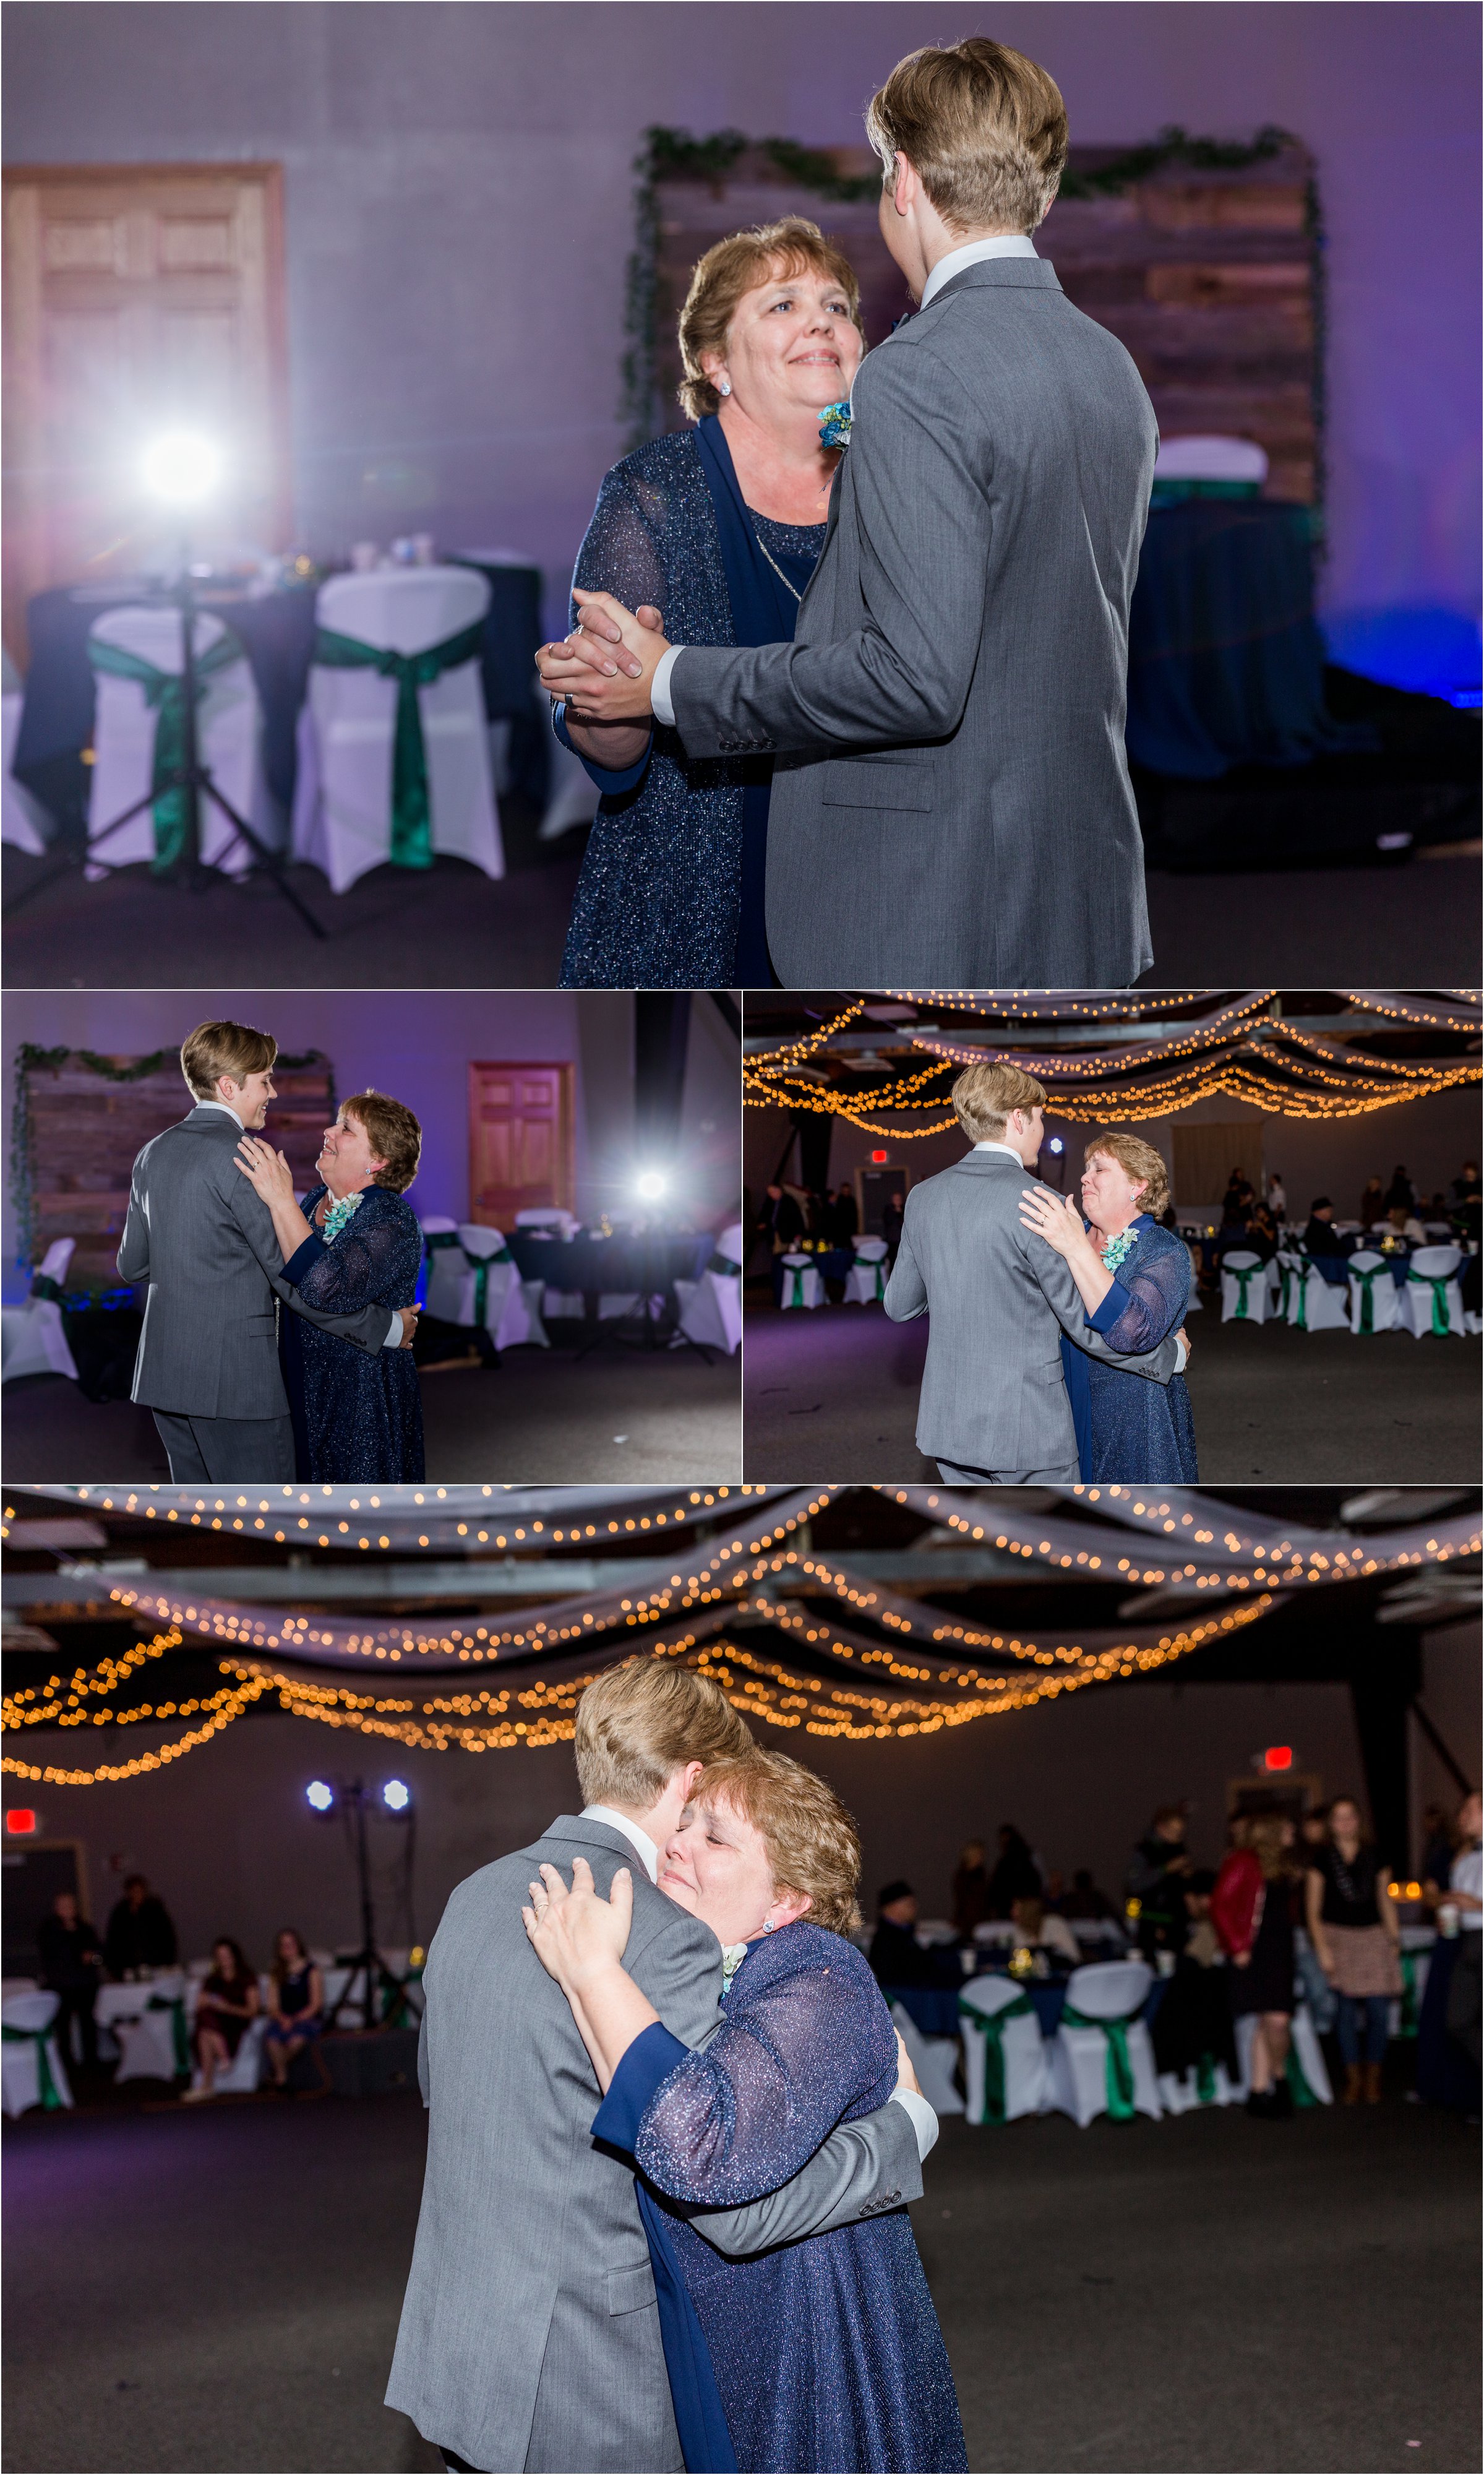 groom dancing with his mom at his wedding wedding reception under twinkly lights